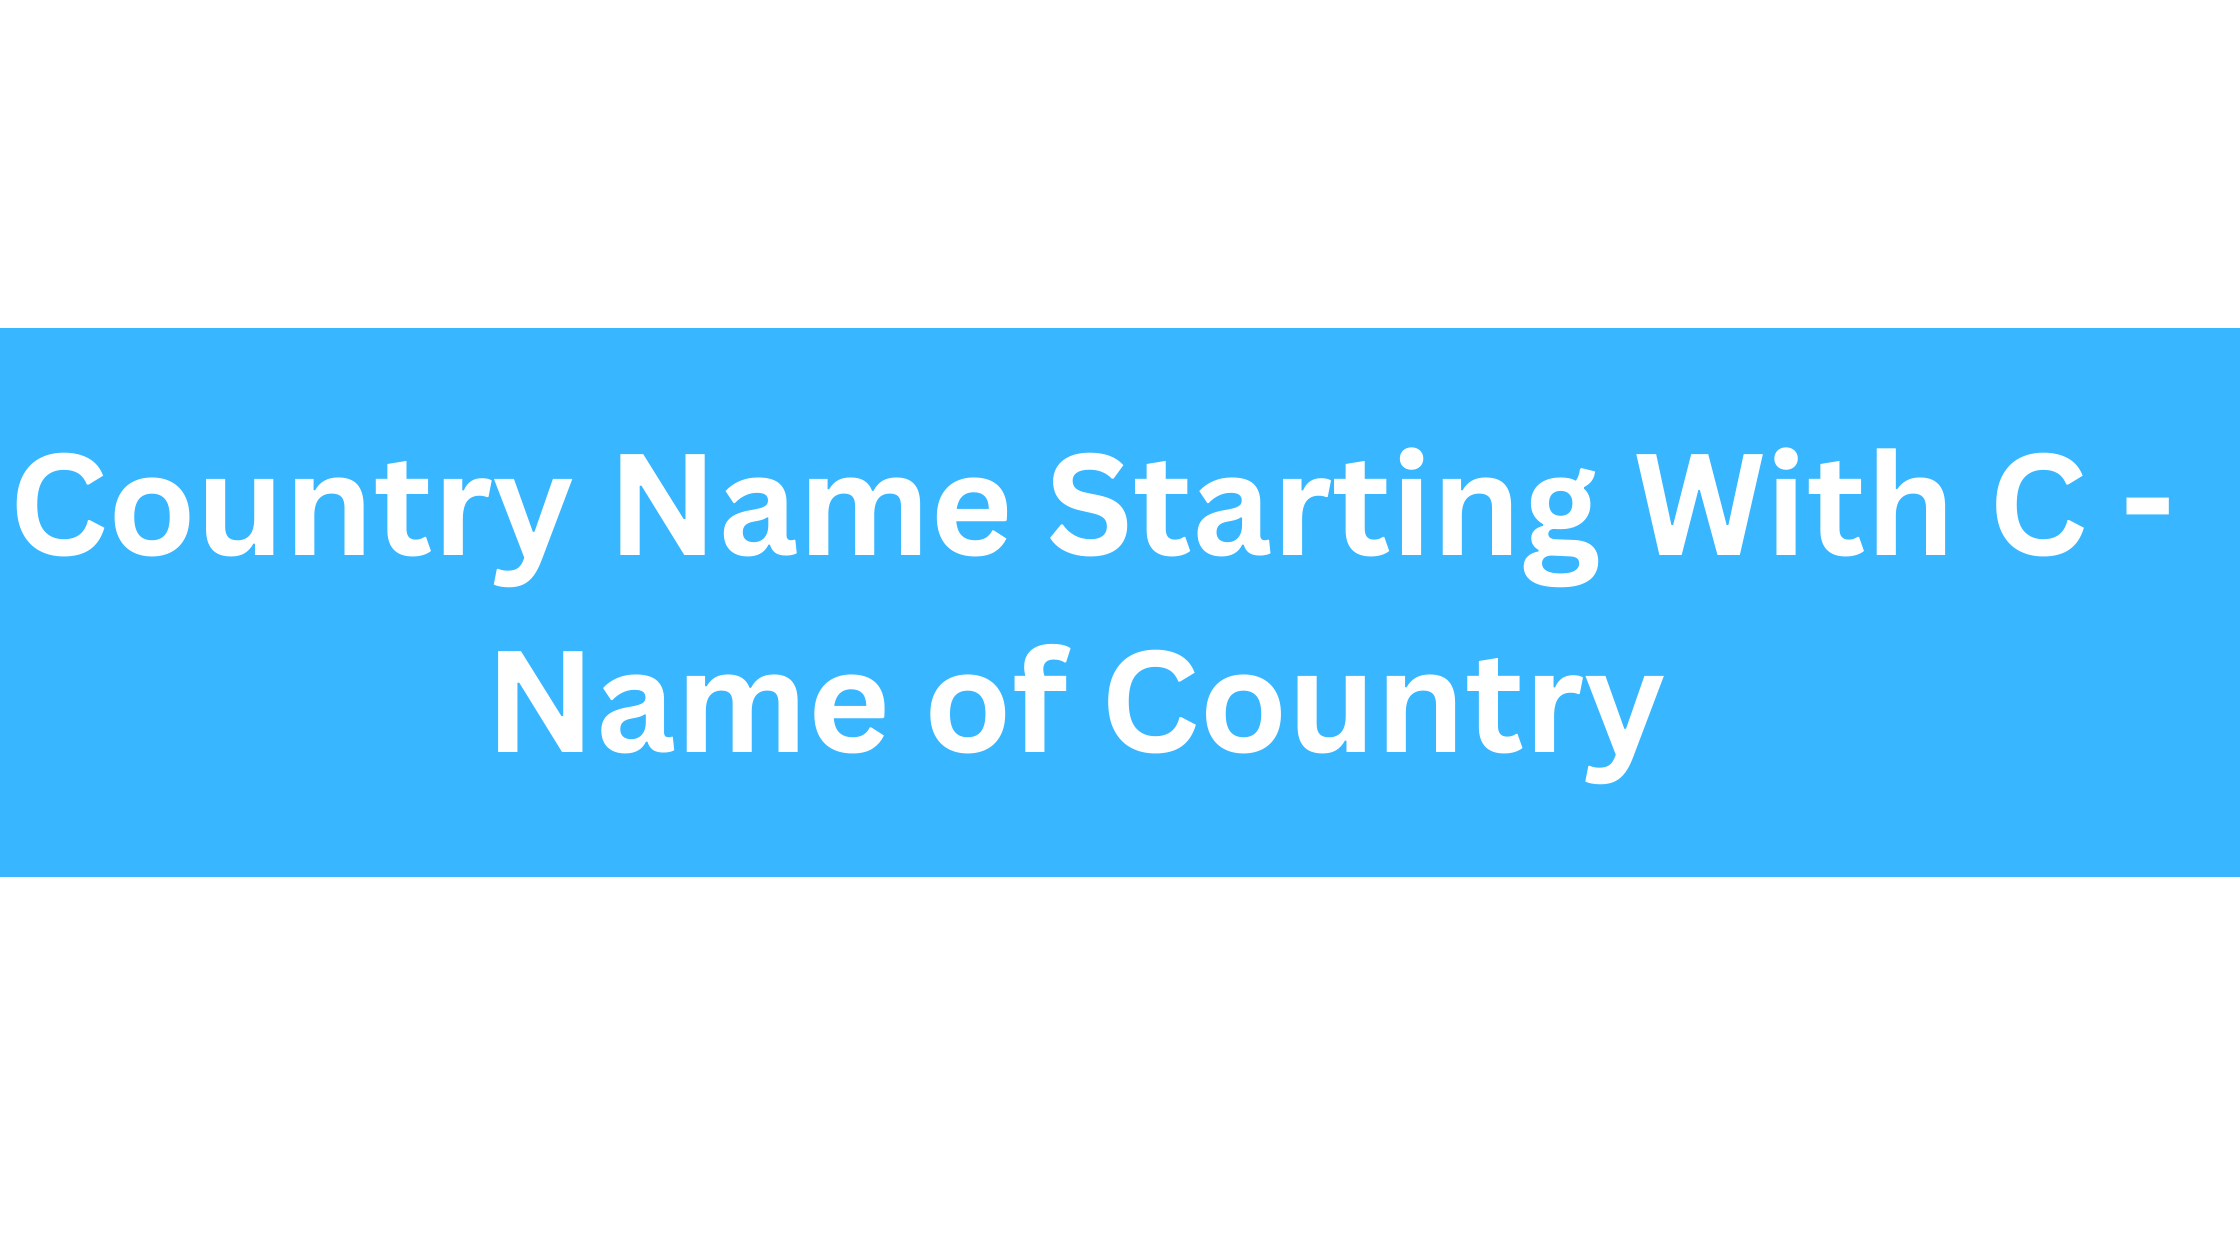 country name starting with C